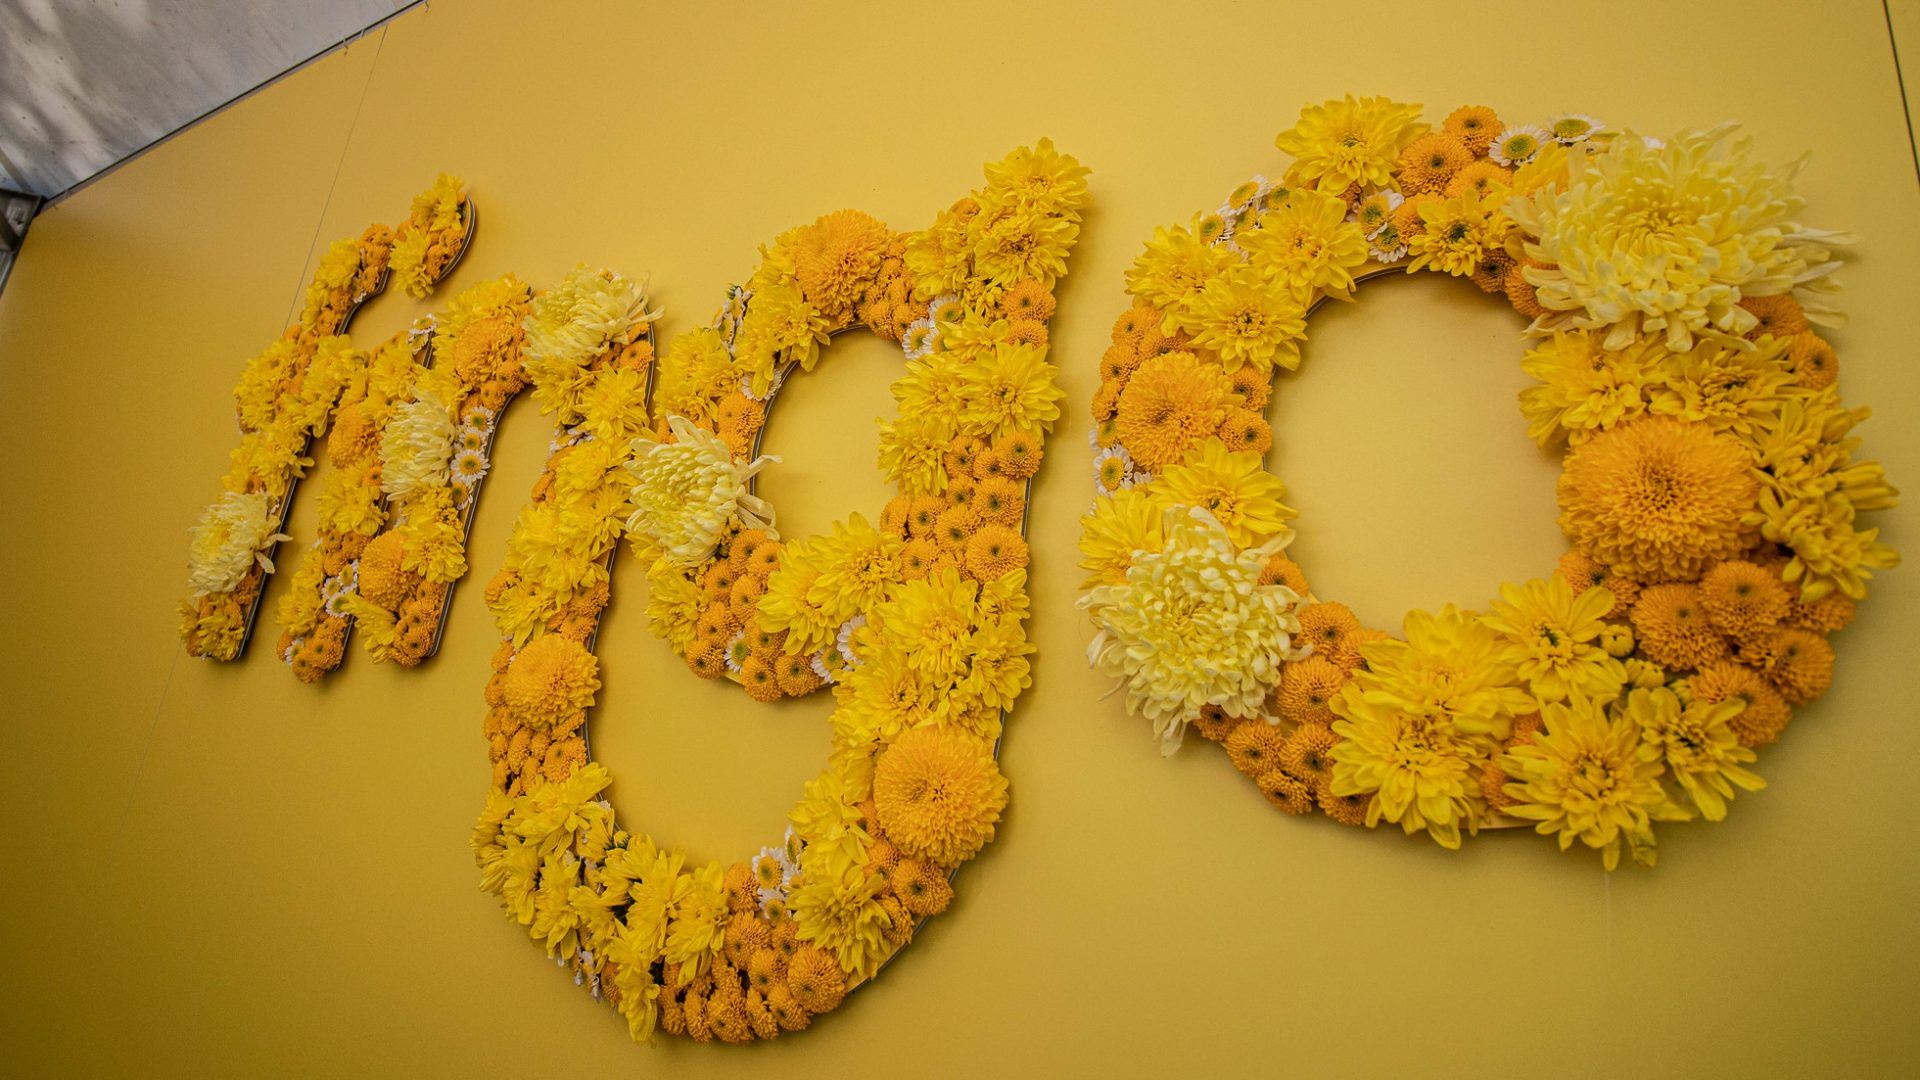 A picture of a yellow wall flower arrangement that writes "Fingo".